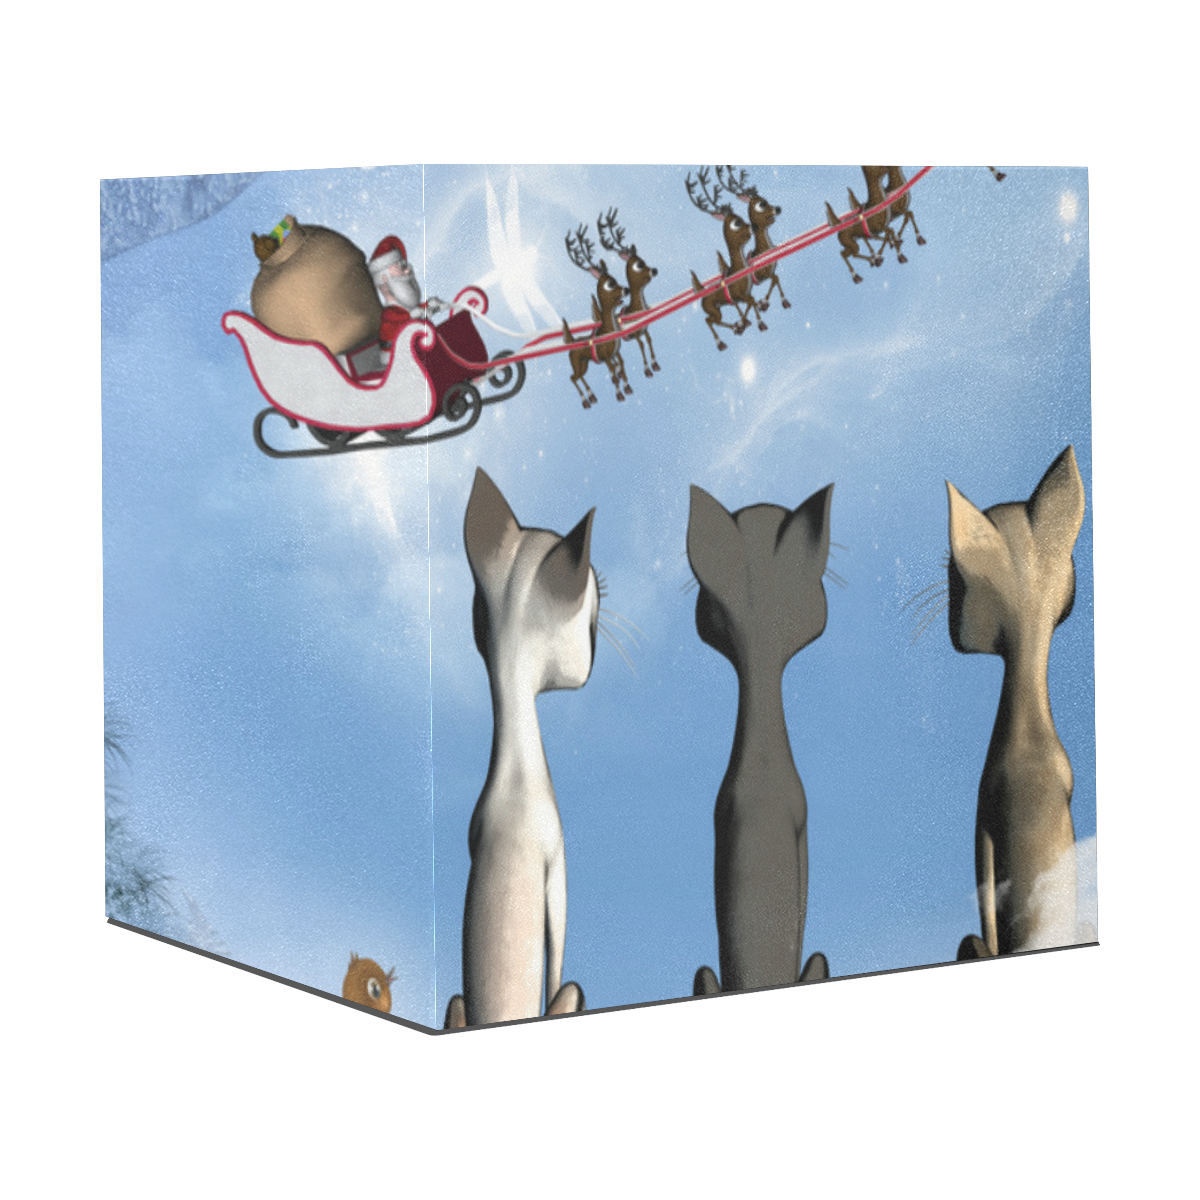 Christmas, cute cats and Santa Claus Gift Wrapping Paper 58"x 23" (1 Roll)